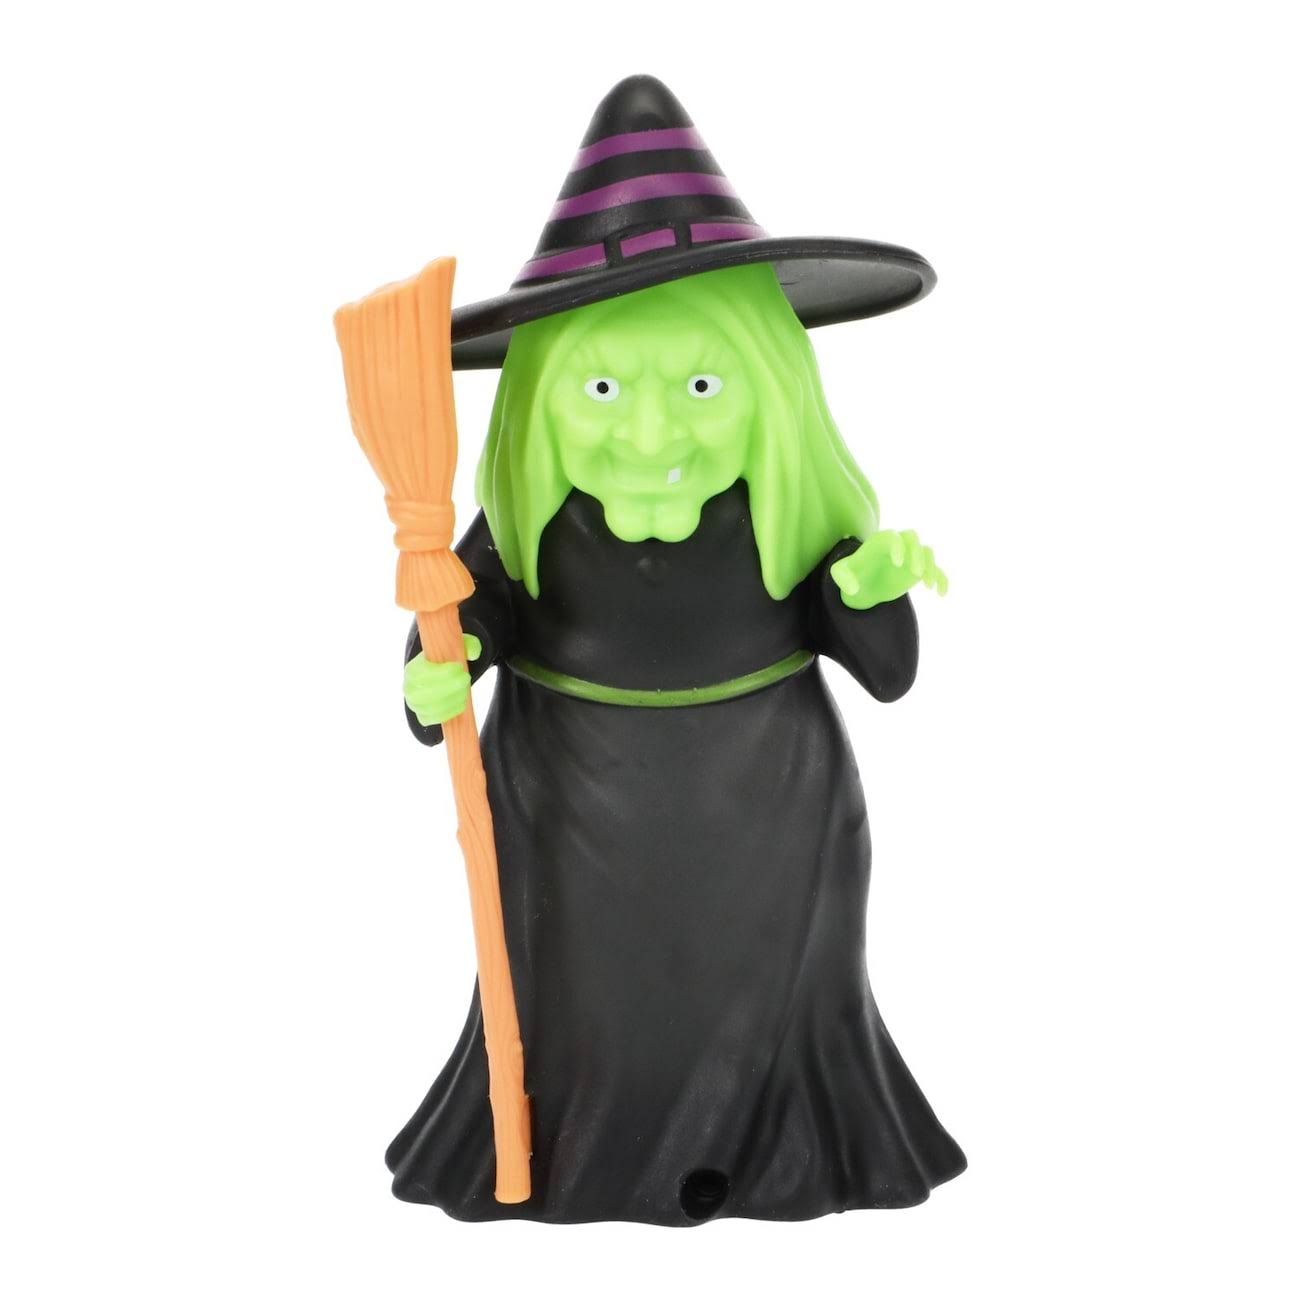 Motion Activated Witch with Light and Sound - 6 x 3 x 3 in